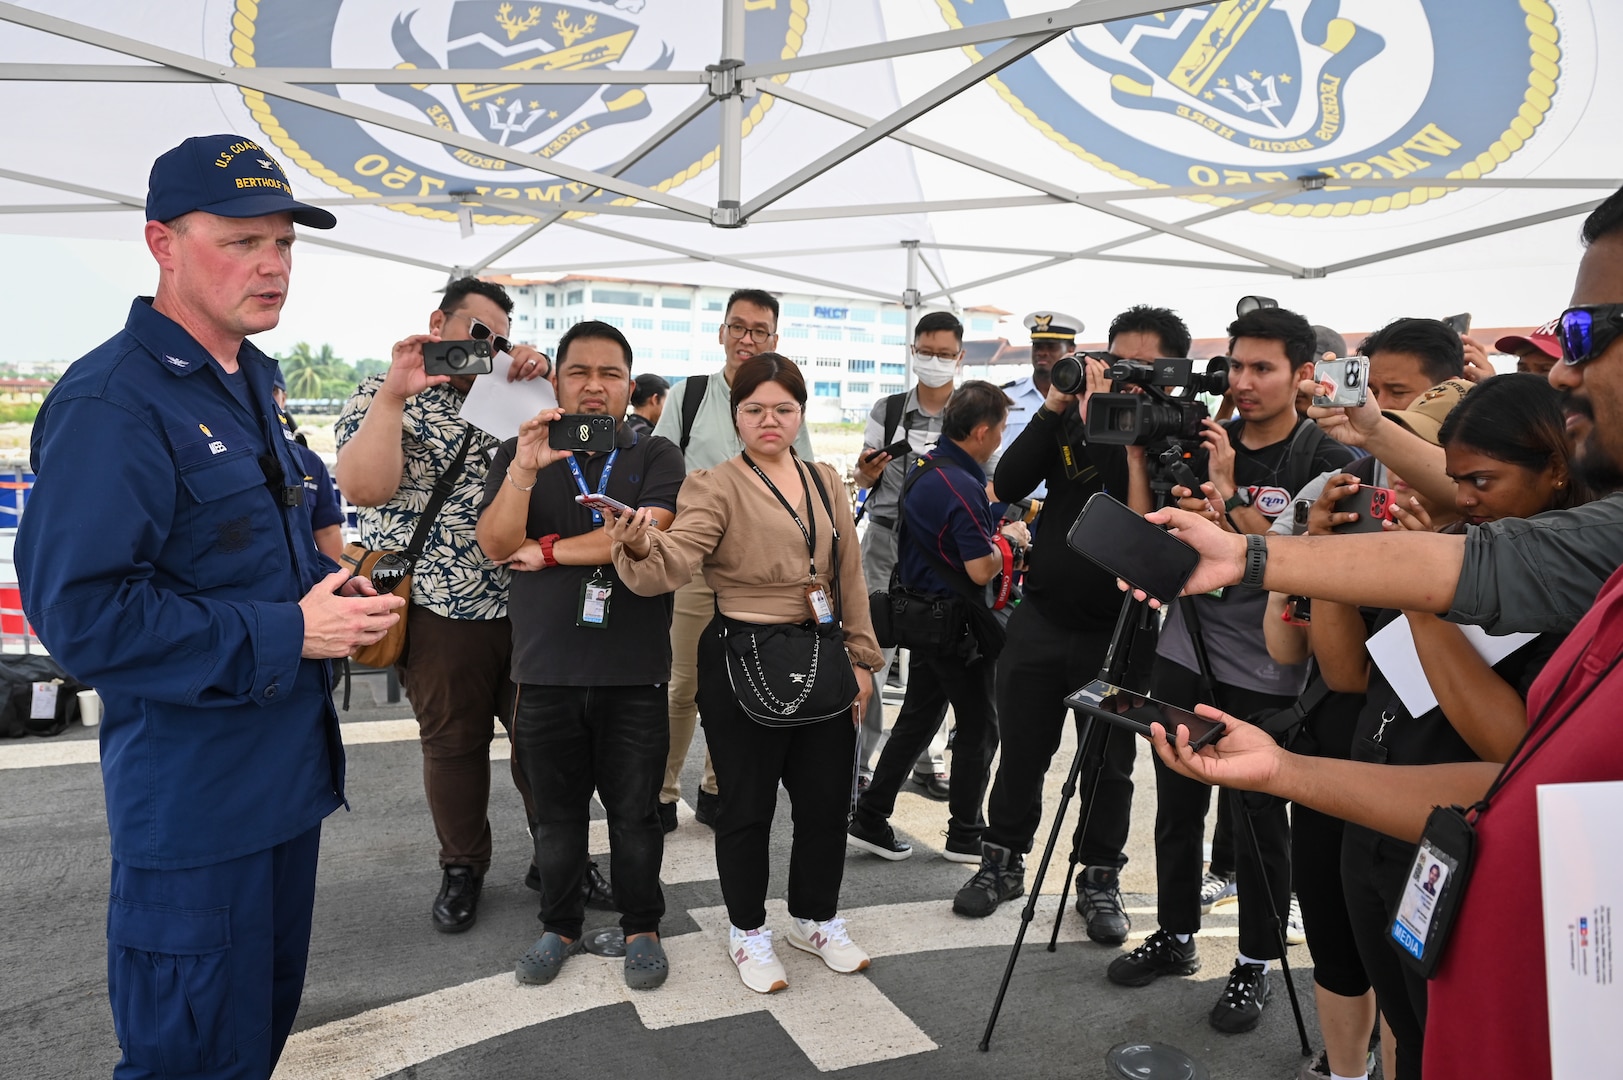 Capt. Billy Mees, commanding officer of U.S. Coast Guard Cutter Bertholf (WMSL 750), speaks to Malaysian media after the cutter arrived in Port Klang, Malaysia, March 1, 2024. The media engagement allowed the local press to come aboard Bertholf and cover the first U.S. Coast Guard ship to moor in Port Klang. (U.S. Coast Guard photo by Petty Officer Steve Strohmaier)